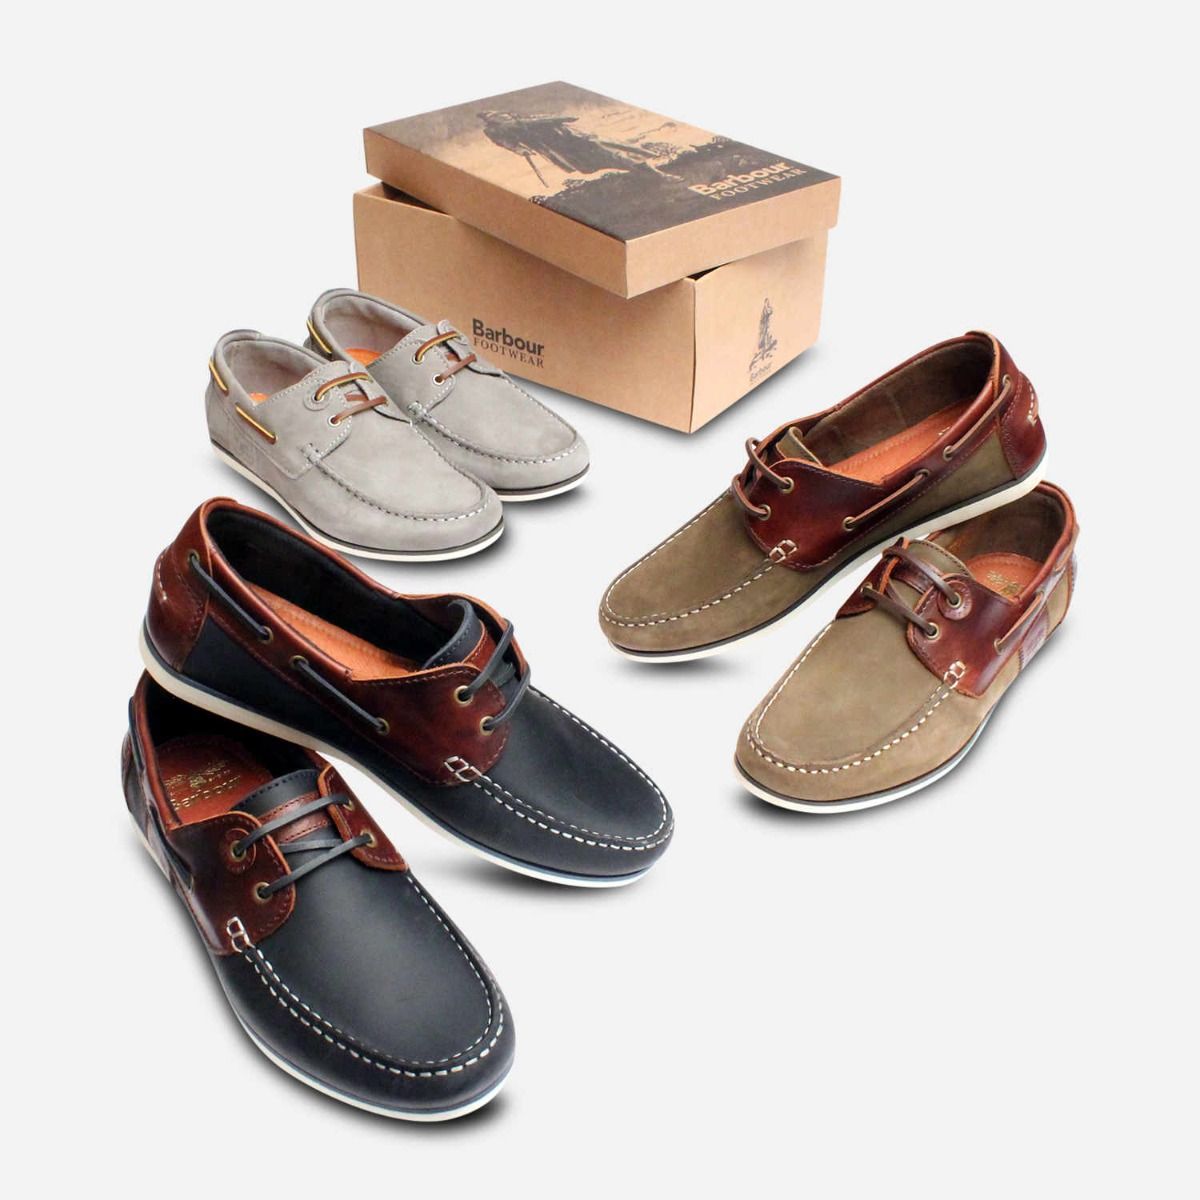 Classic Barbour Capstan Boat Shoes in 